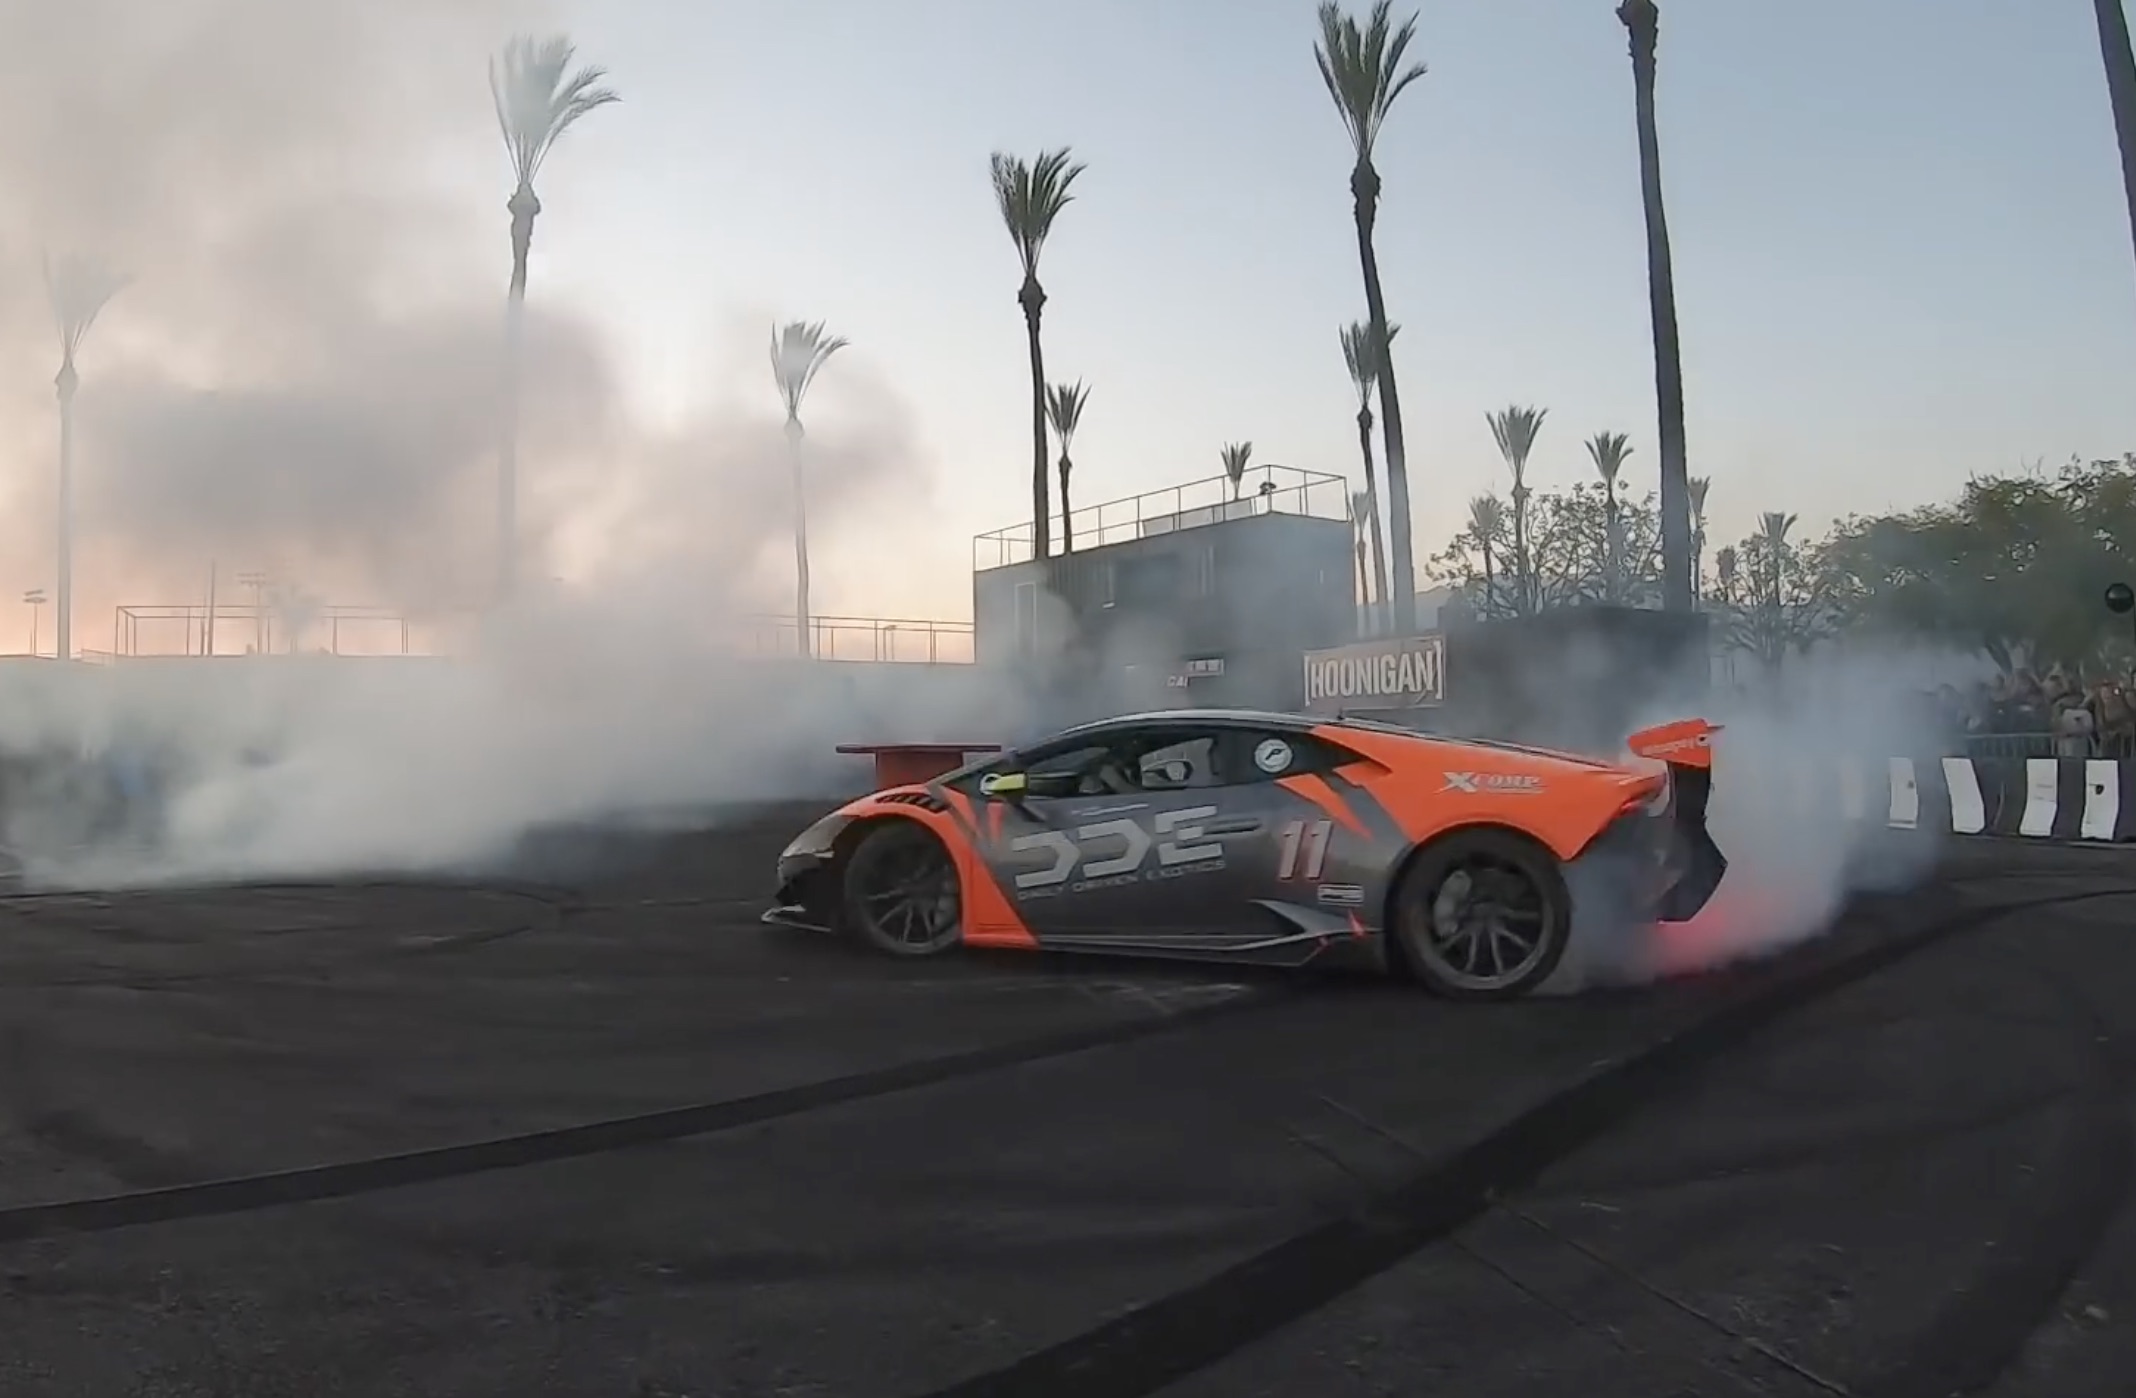 Hoonigan’s Wildest Burnyard Event Ever? They Review The Mental Action From Irwindale